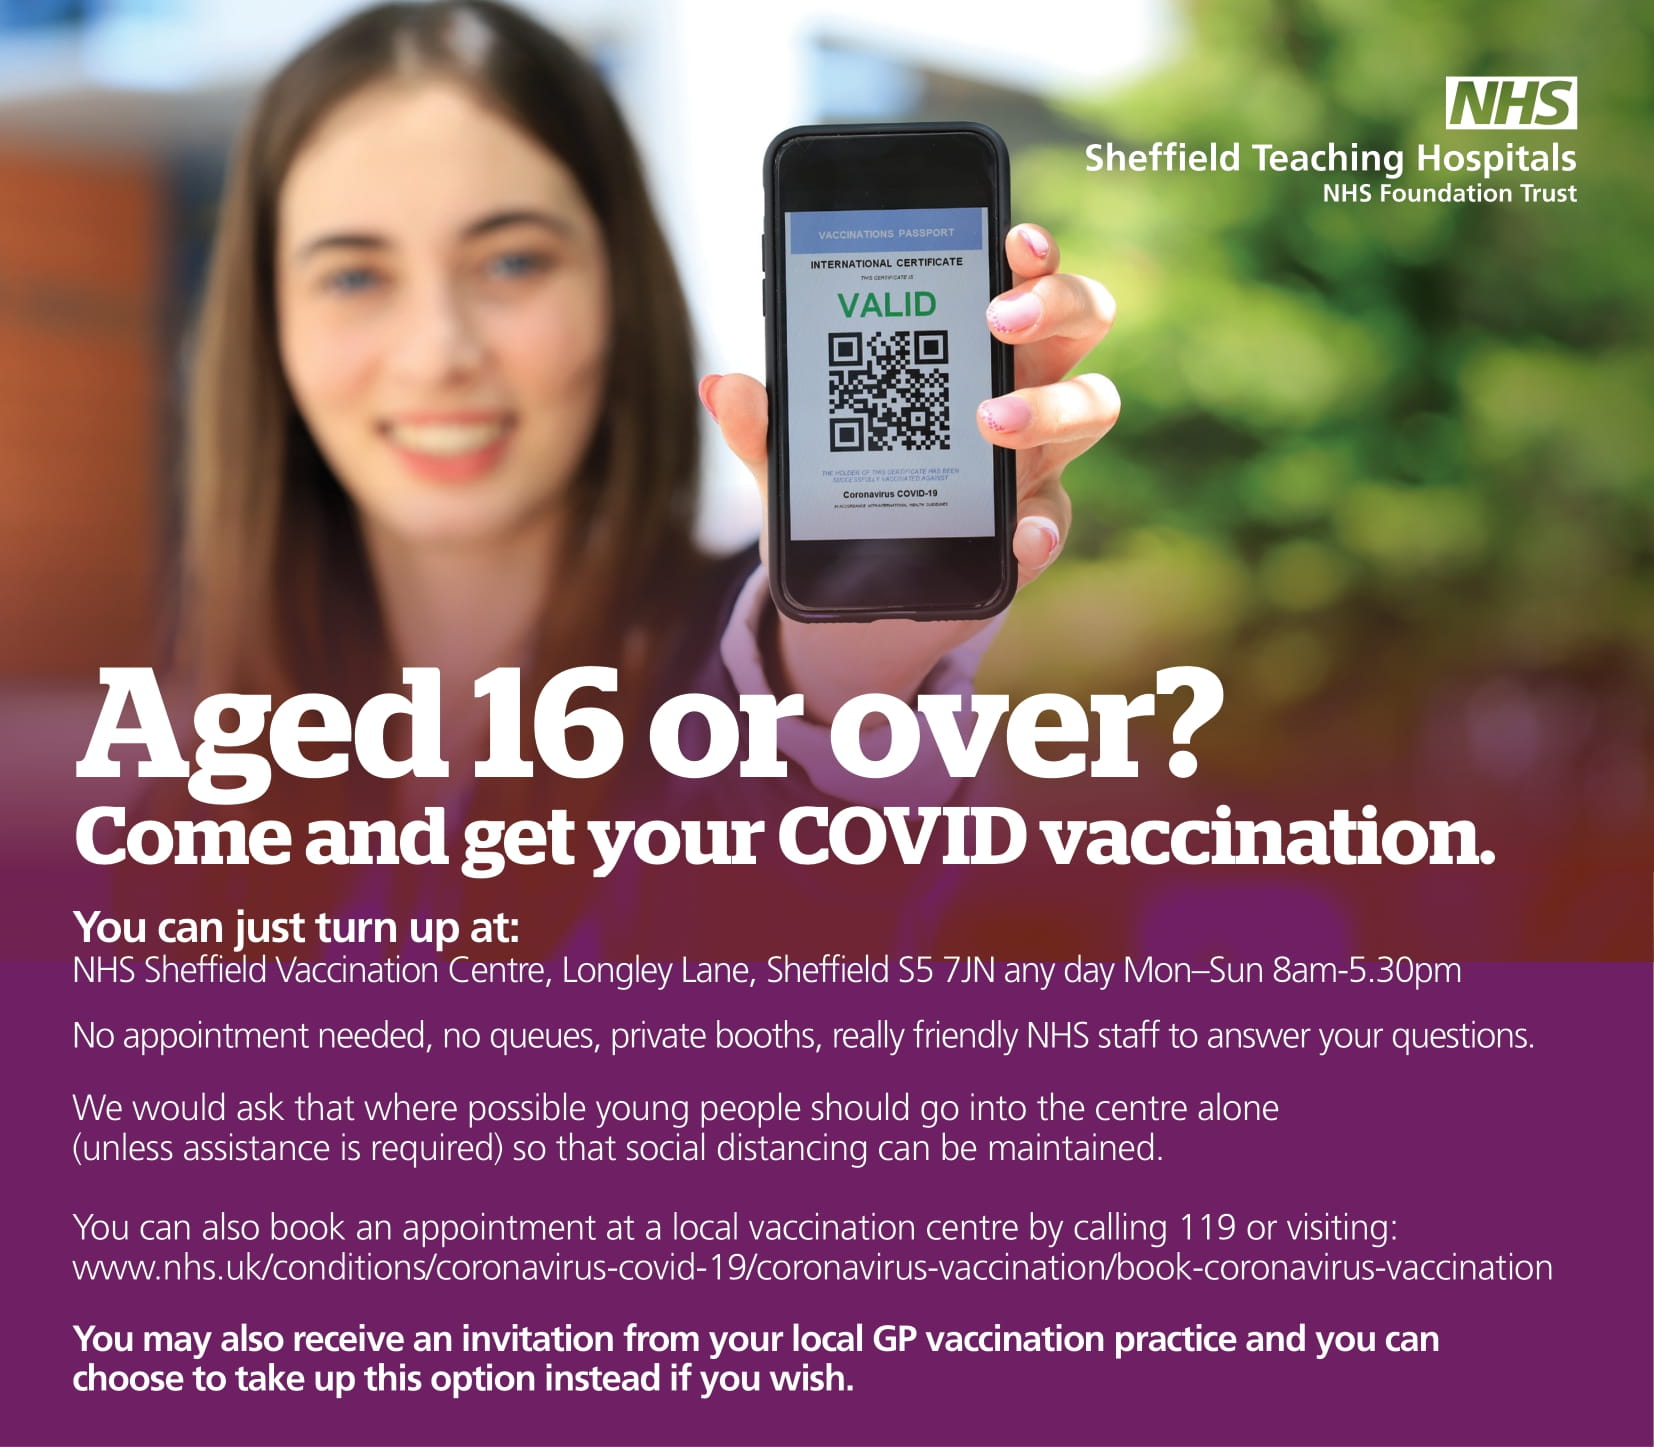 Sheffield Vaccination Centre now offering COVID-19 vaccine to young people aged 16 and over